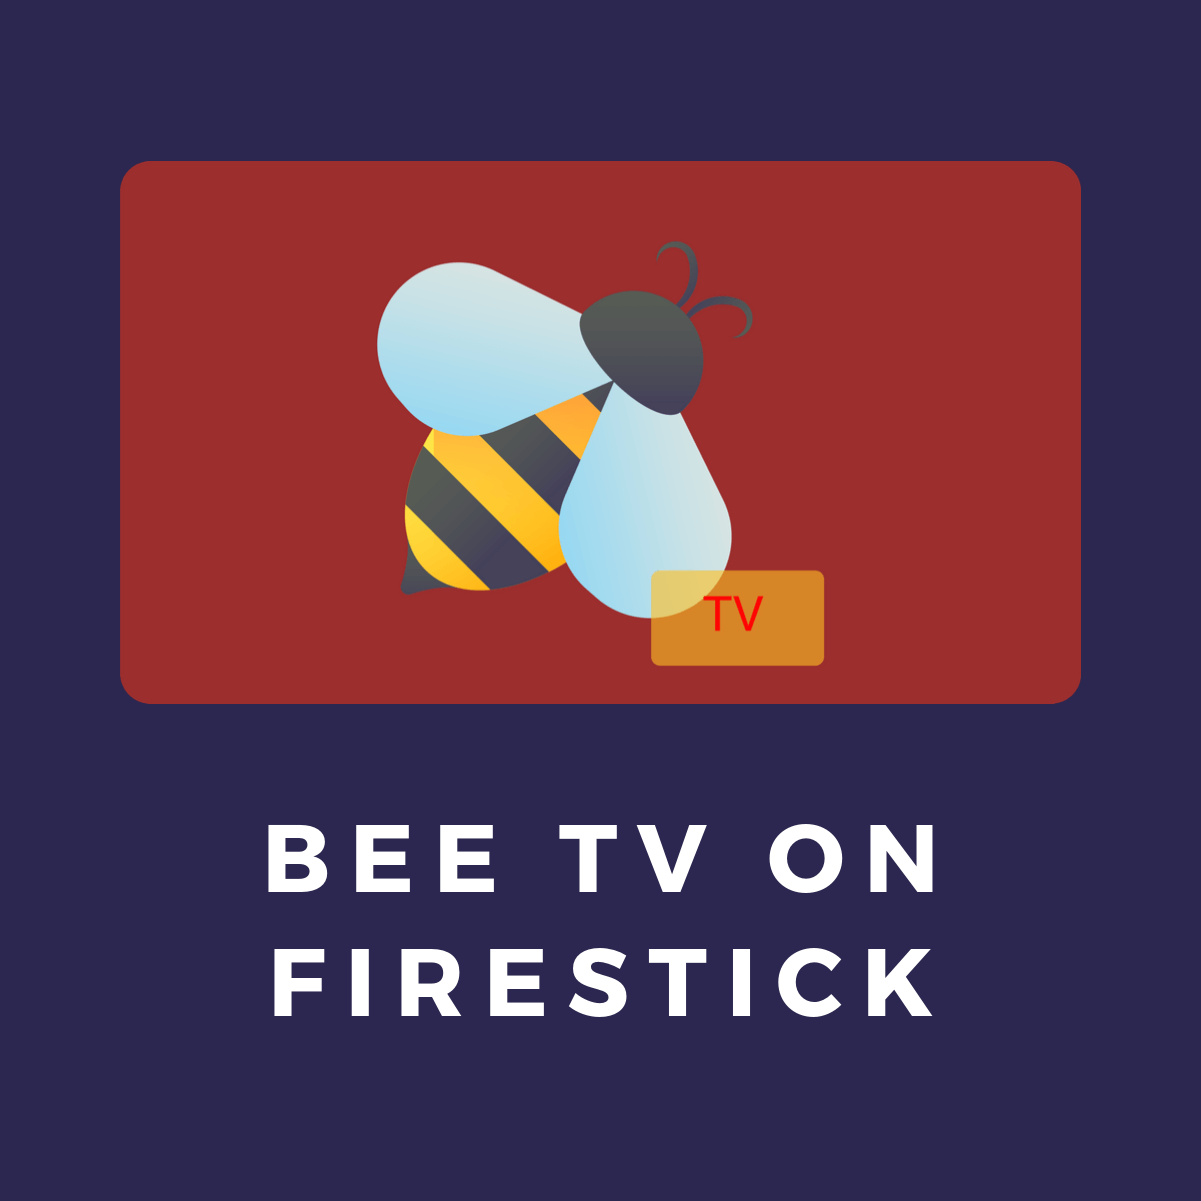 How To Install Beetv On Firestick 2020 Easy Guide